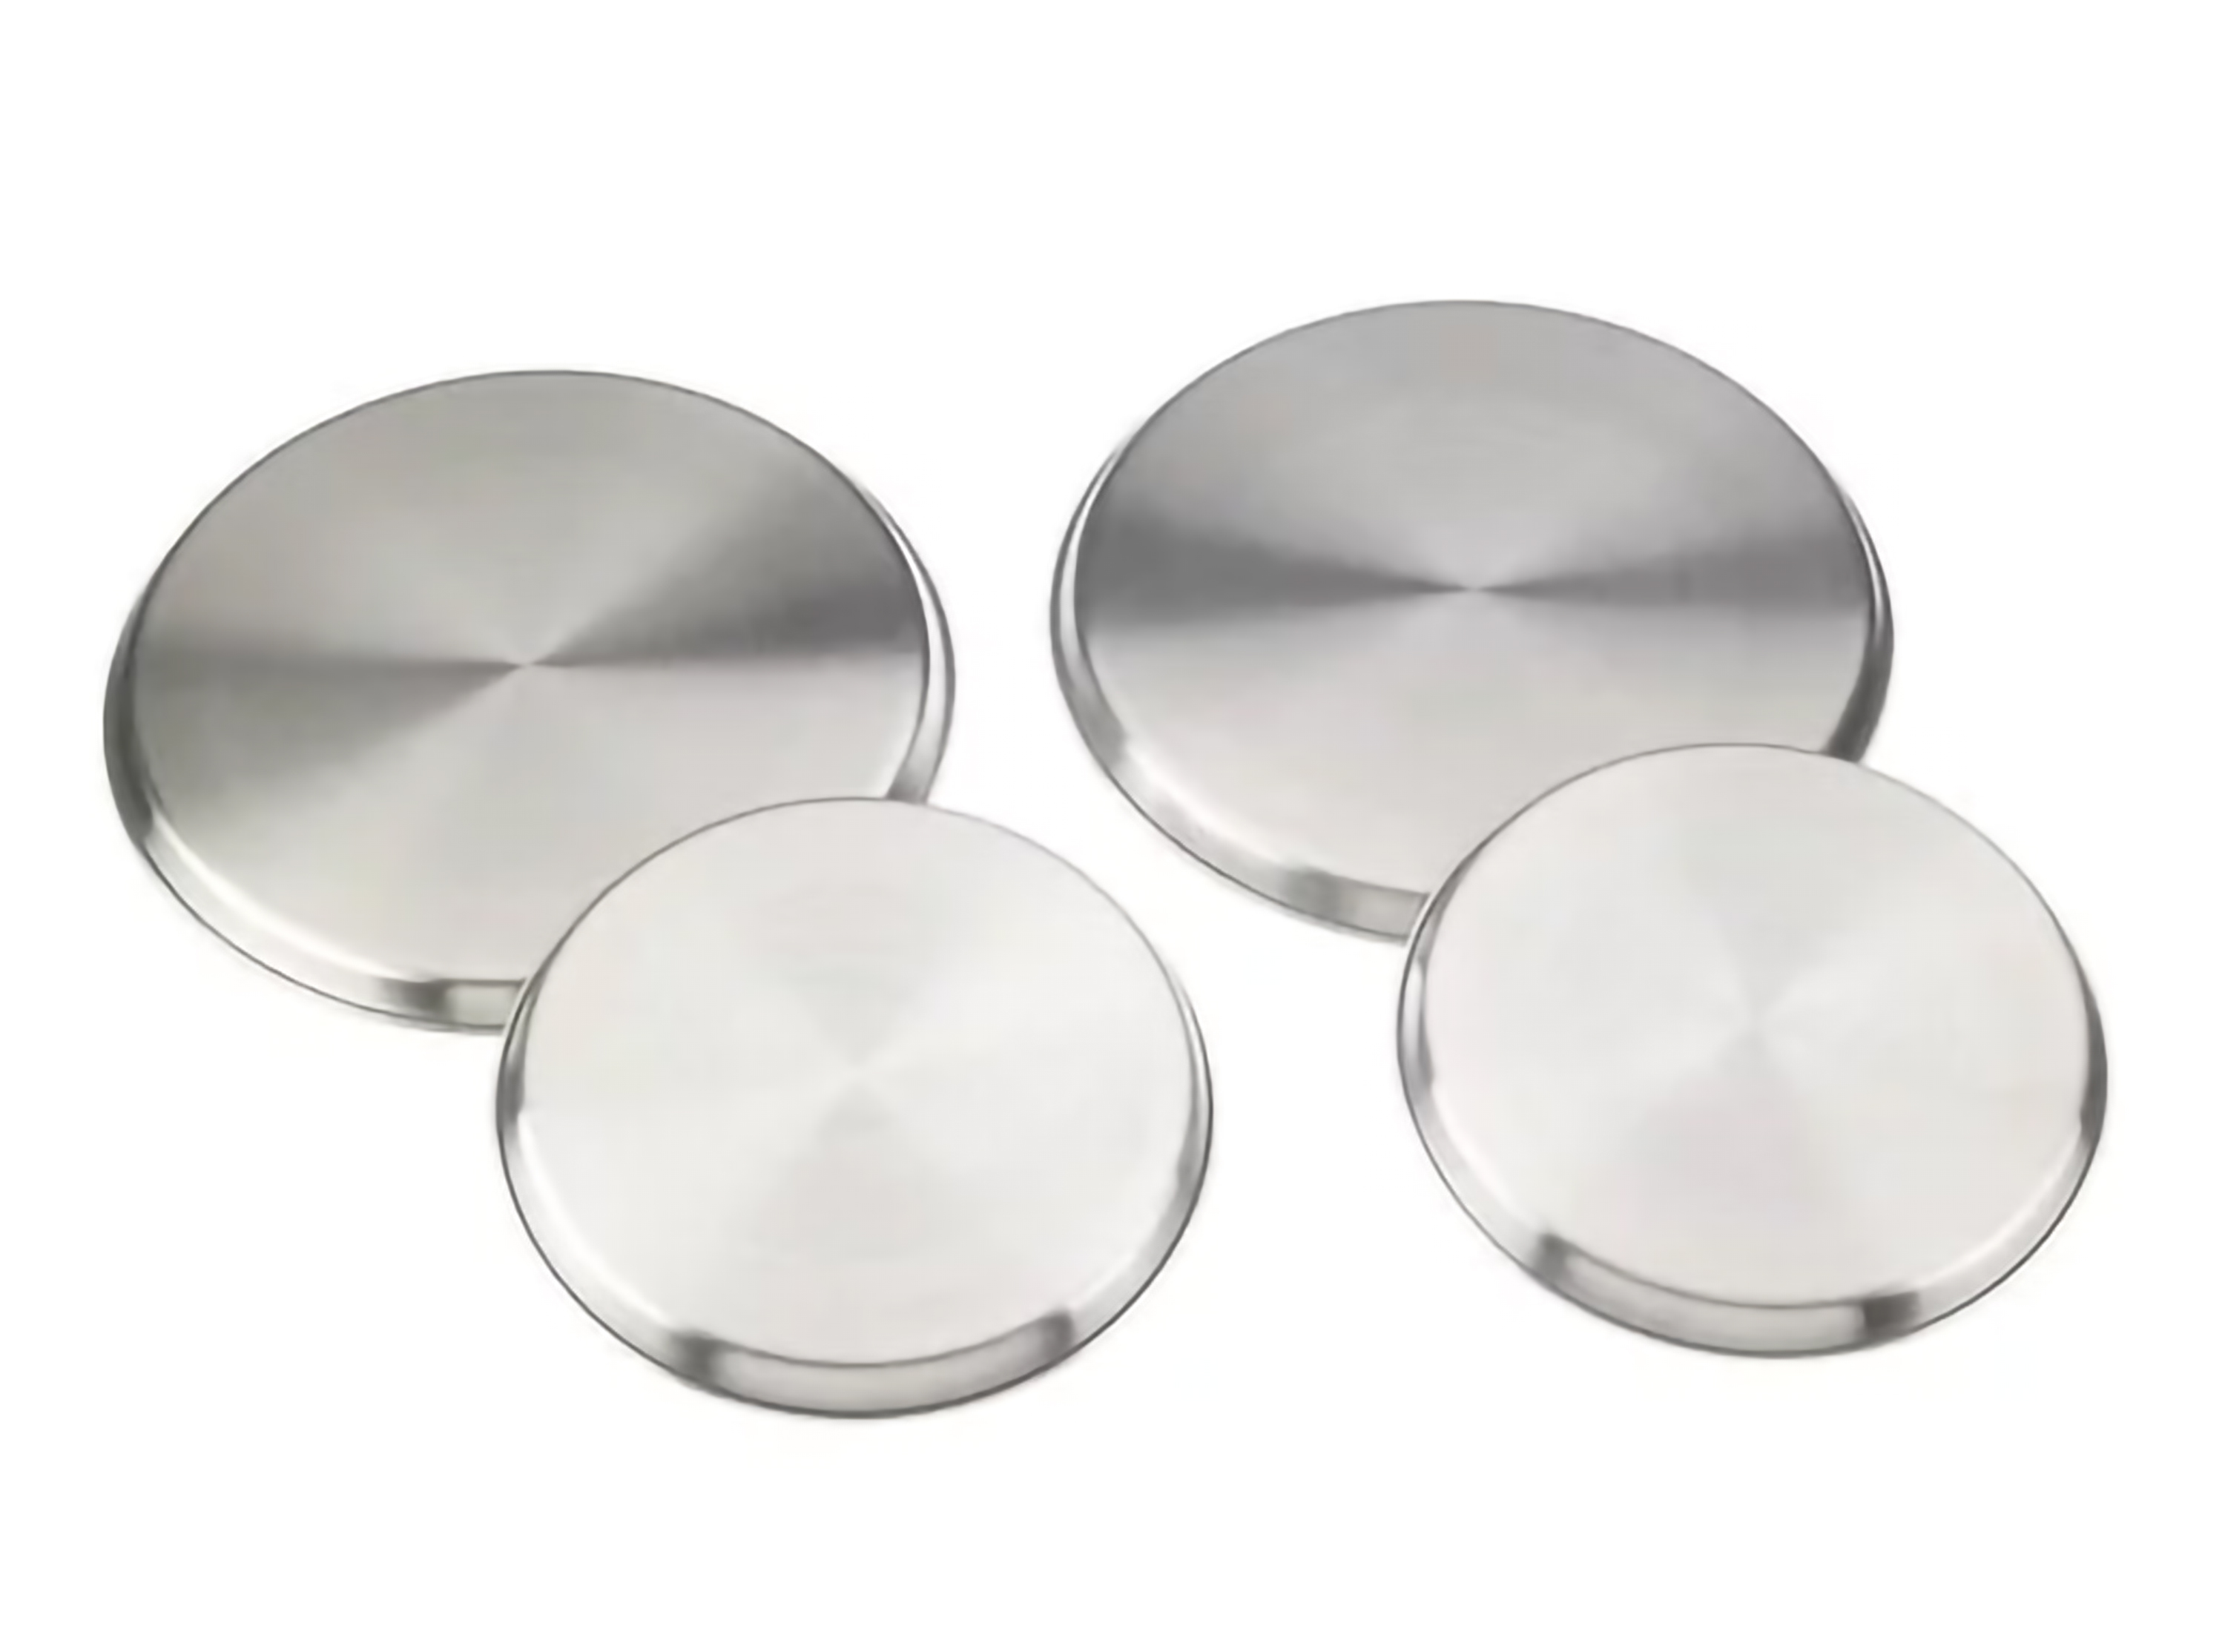 Mainstays Stove Burner Covers, 4 Piece Set, Stainless Steel, Silver - image 1 of 13